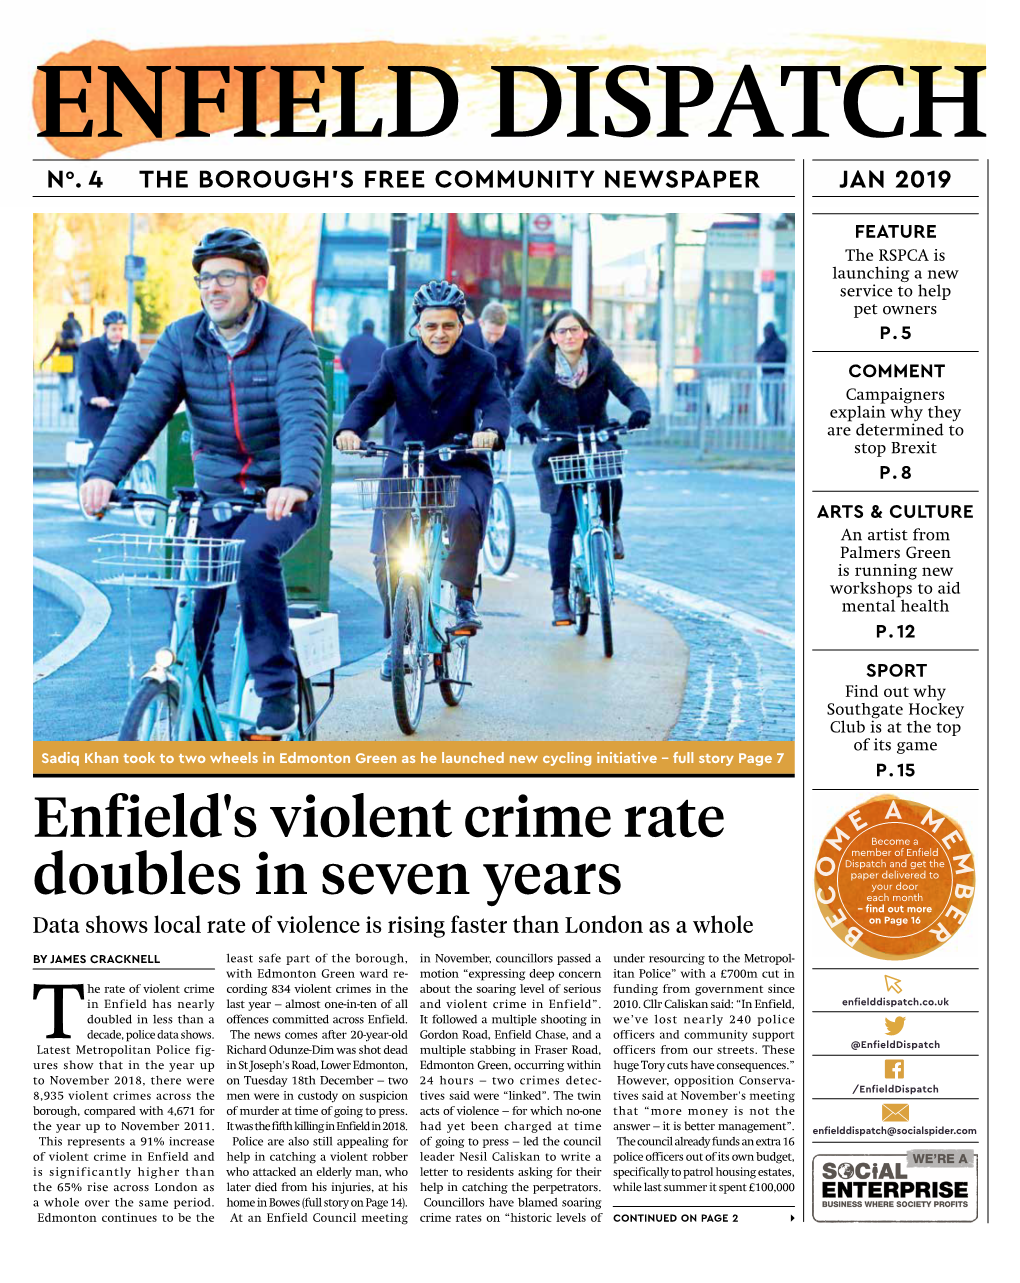 Enfield's Violent Crime Rate Doubles in Seven Years